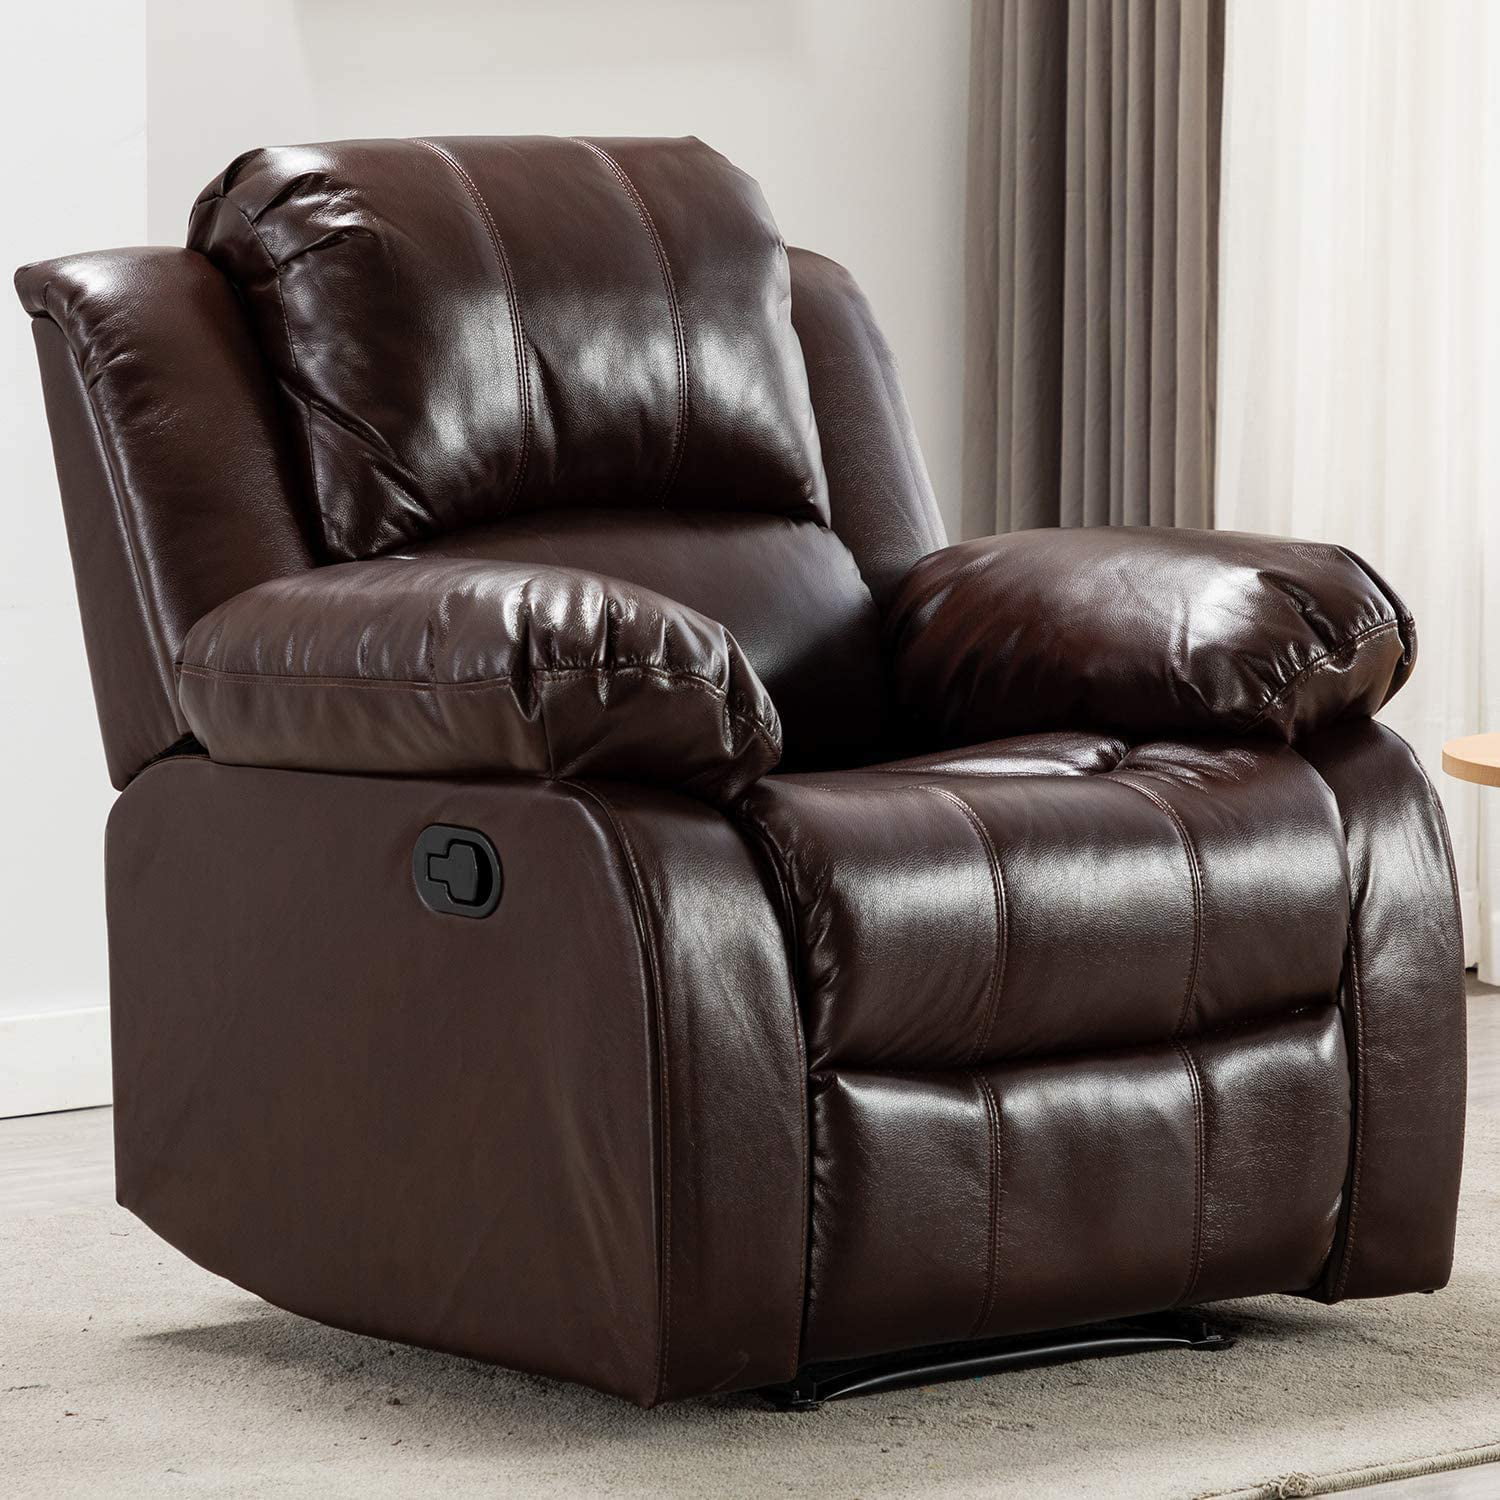 Home Air Leather Recliner Chair Overstuffed Heavy Duty